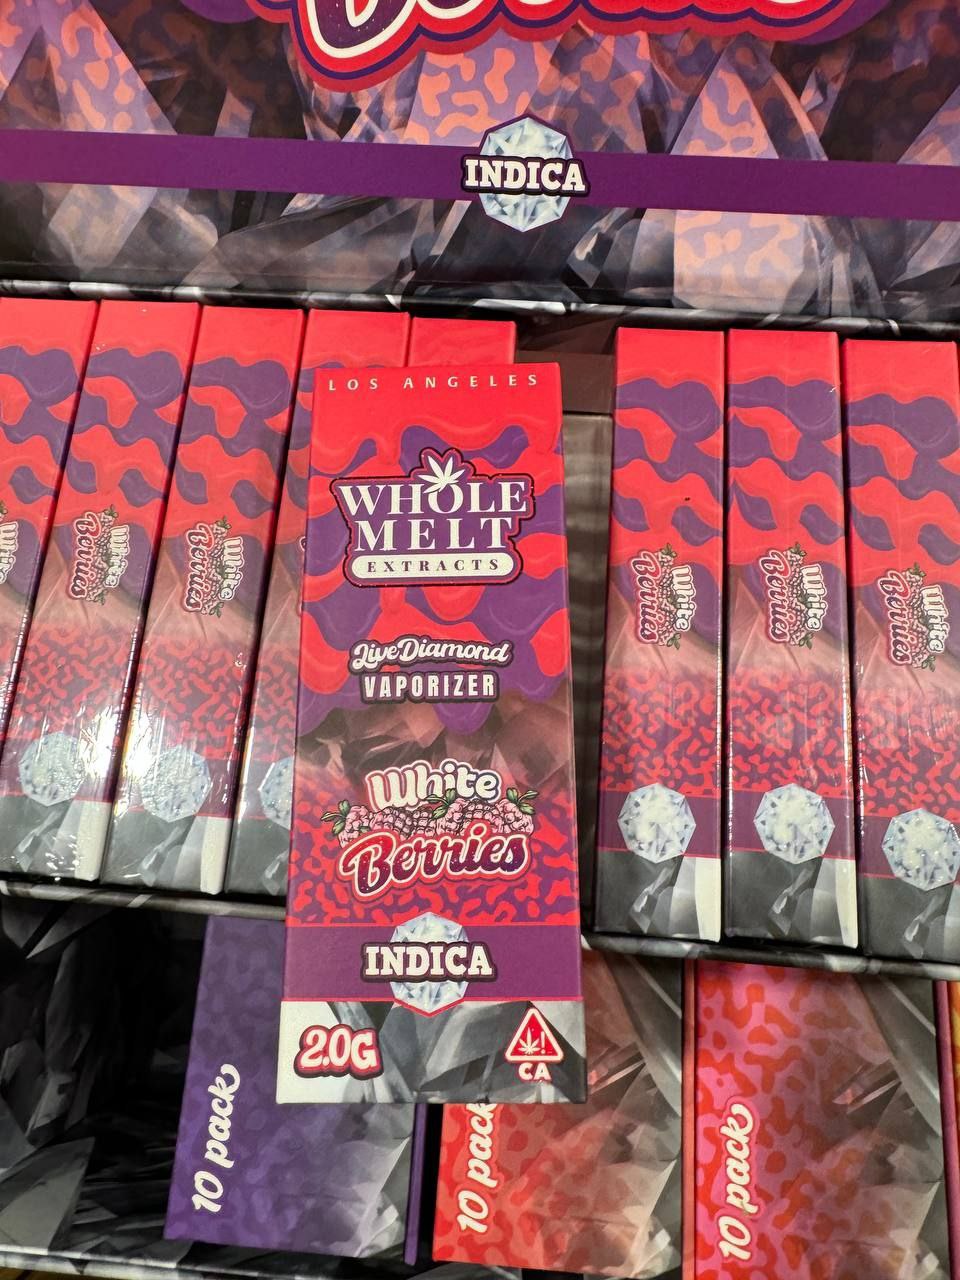 A display of **Import placeholder for 63** is shown. The packaging is predominantly purple and red with a berry motif. Each box is labeled as indica, 2.0g, and includes the Cannabis CA symbol. The boxes are organized in a retail setup.